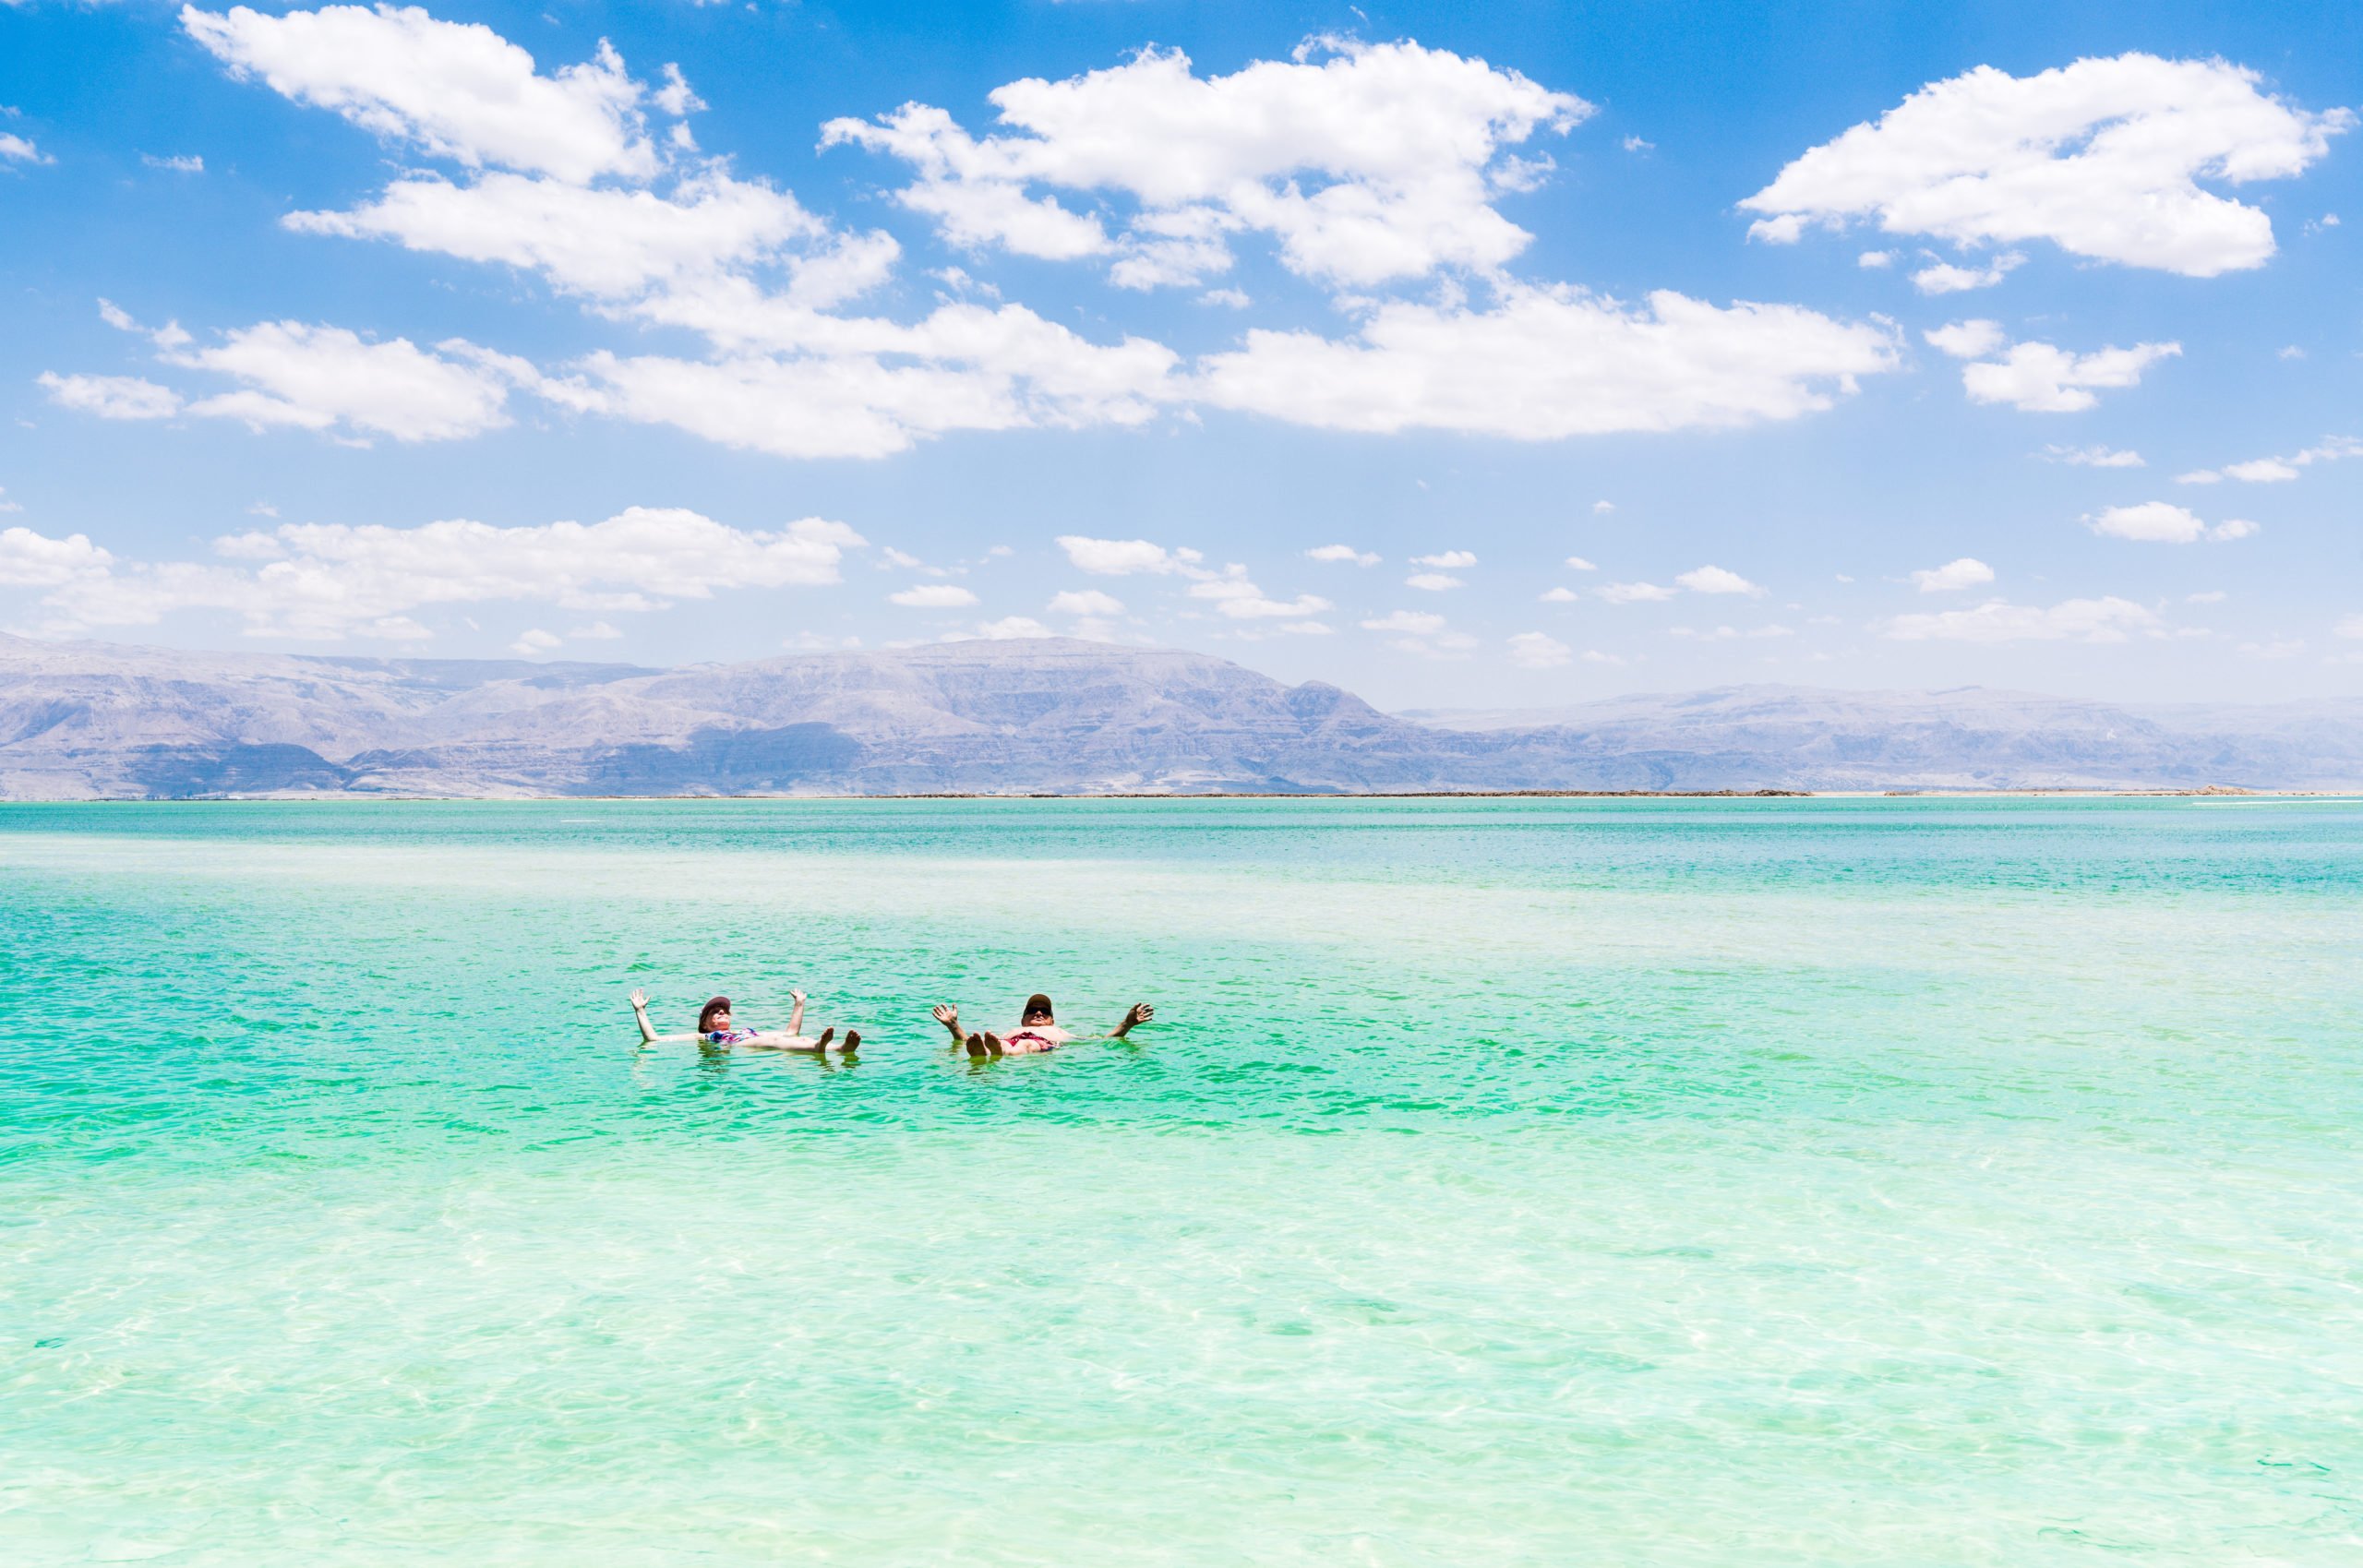 Discover The Dead Sea On The 13 Day Highlights Of Israel, Saudi Arabia & Jordan Package Tour